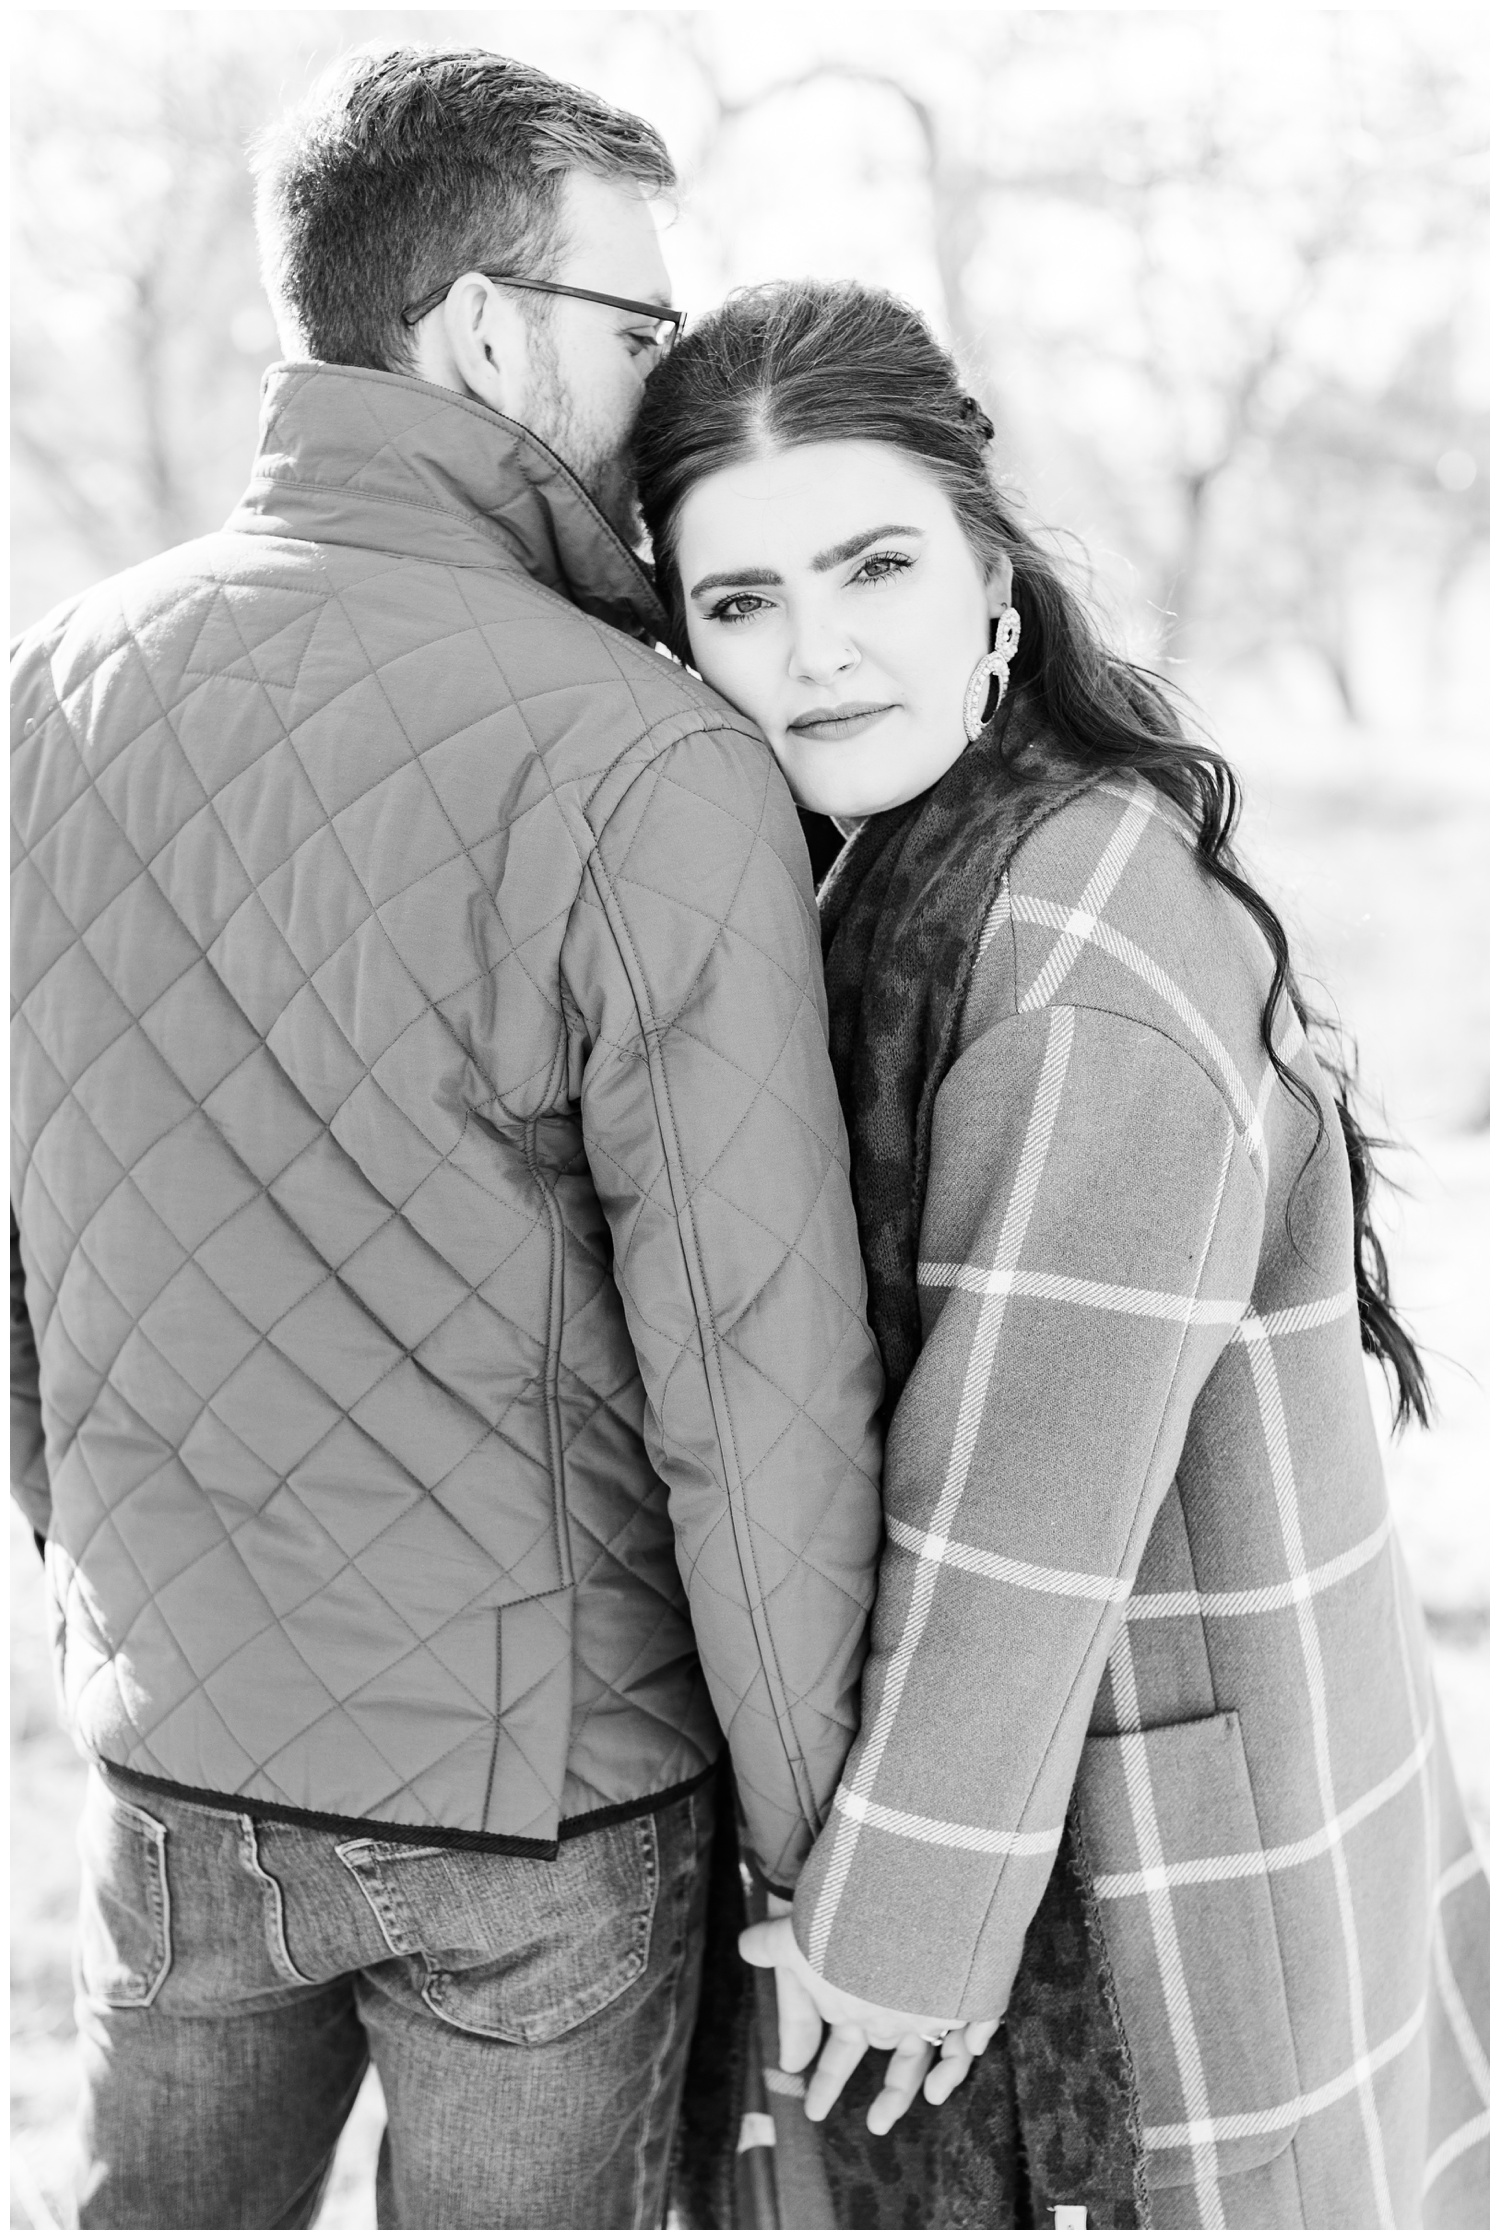 Rachel rests her head on her fiance's shoulder as they hold hands | CB Studio